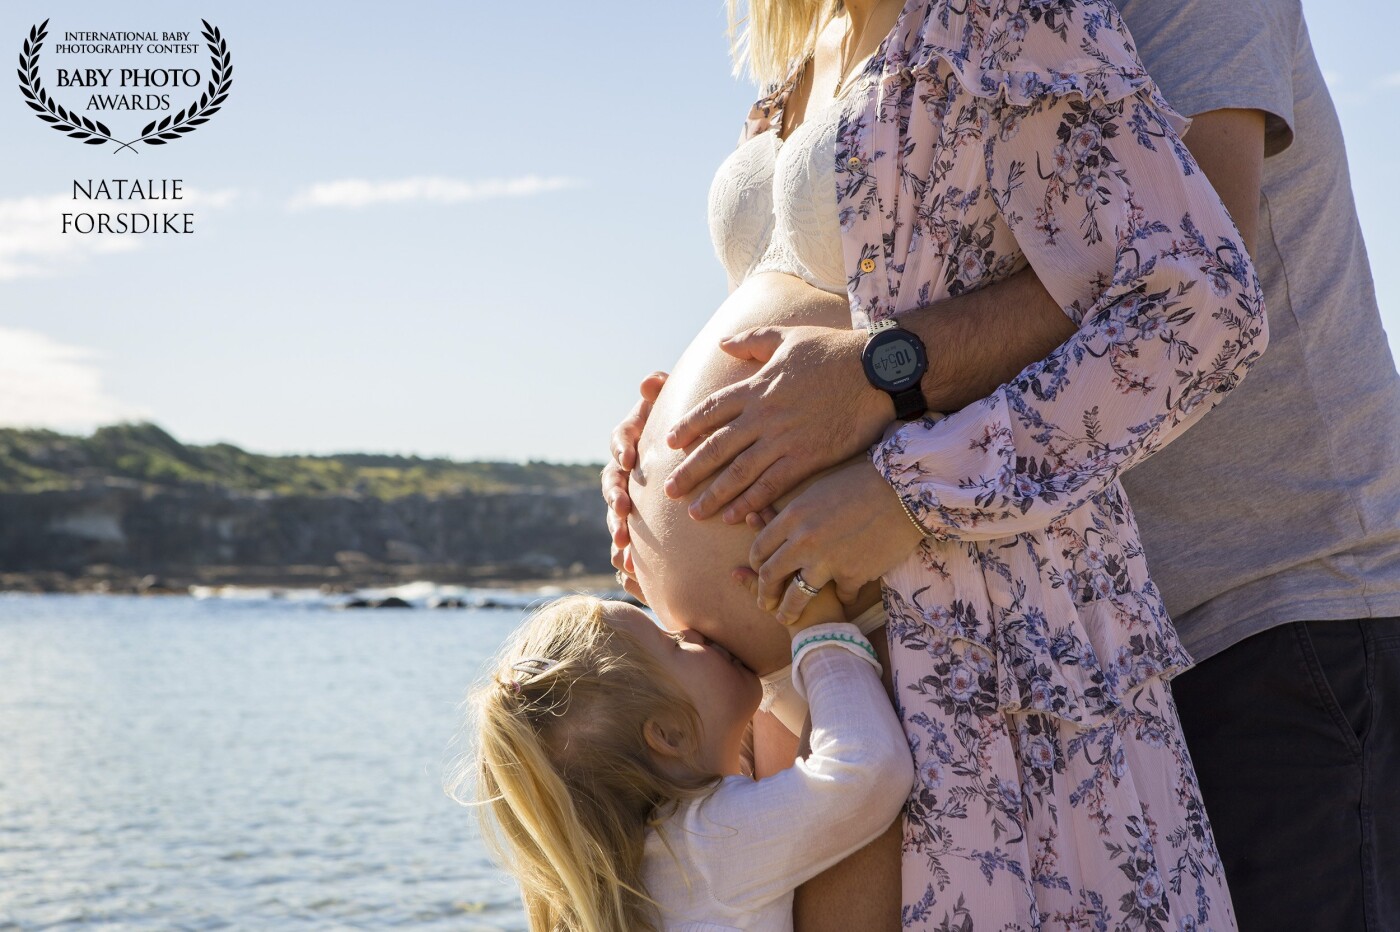 Another gorgeous maternity beach shoot in Sydney. We have the best hidden beaches which make fantastic locations for outdoor photo shoots - even in the middle of winter! This is the second time I have captured this growing family's baby on board and I can't wait to photograph their newest arrival very soon. 